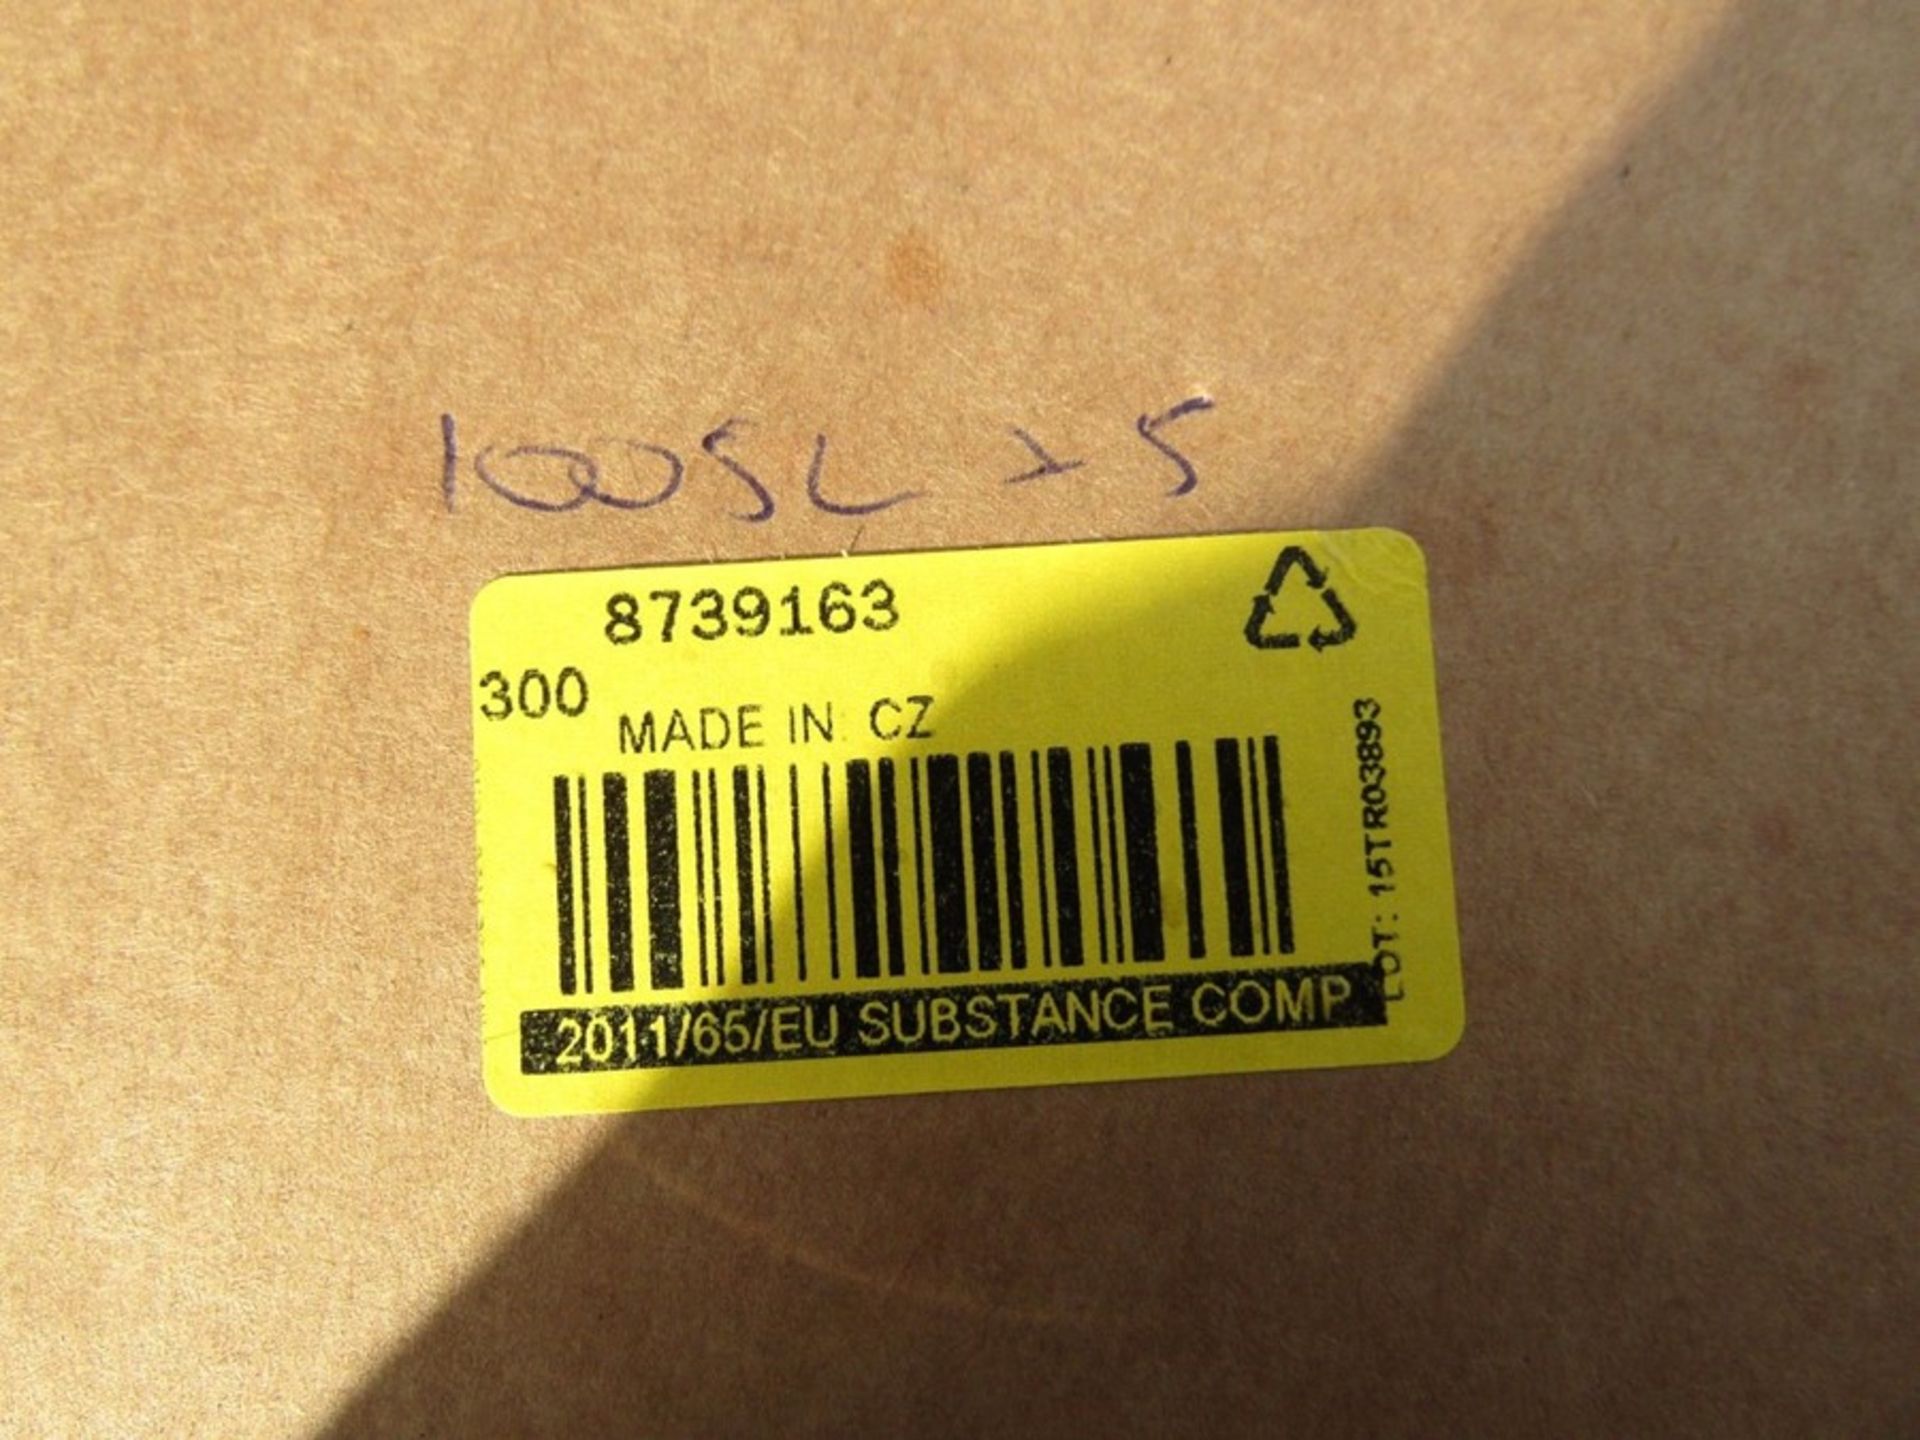 300m x TE Connectivity CGPT White Heat Shrink Tubing 2:1 2.4mm dia 1005L 8739163 - Image 3 of 3